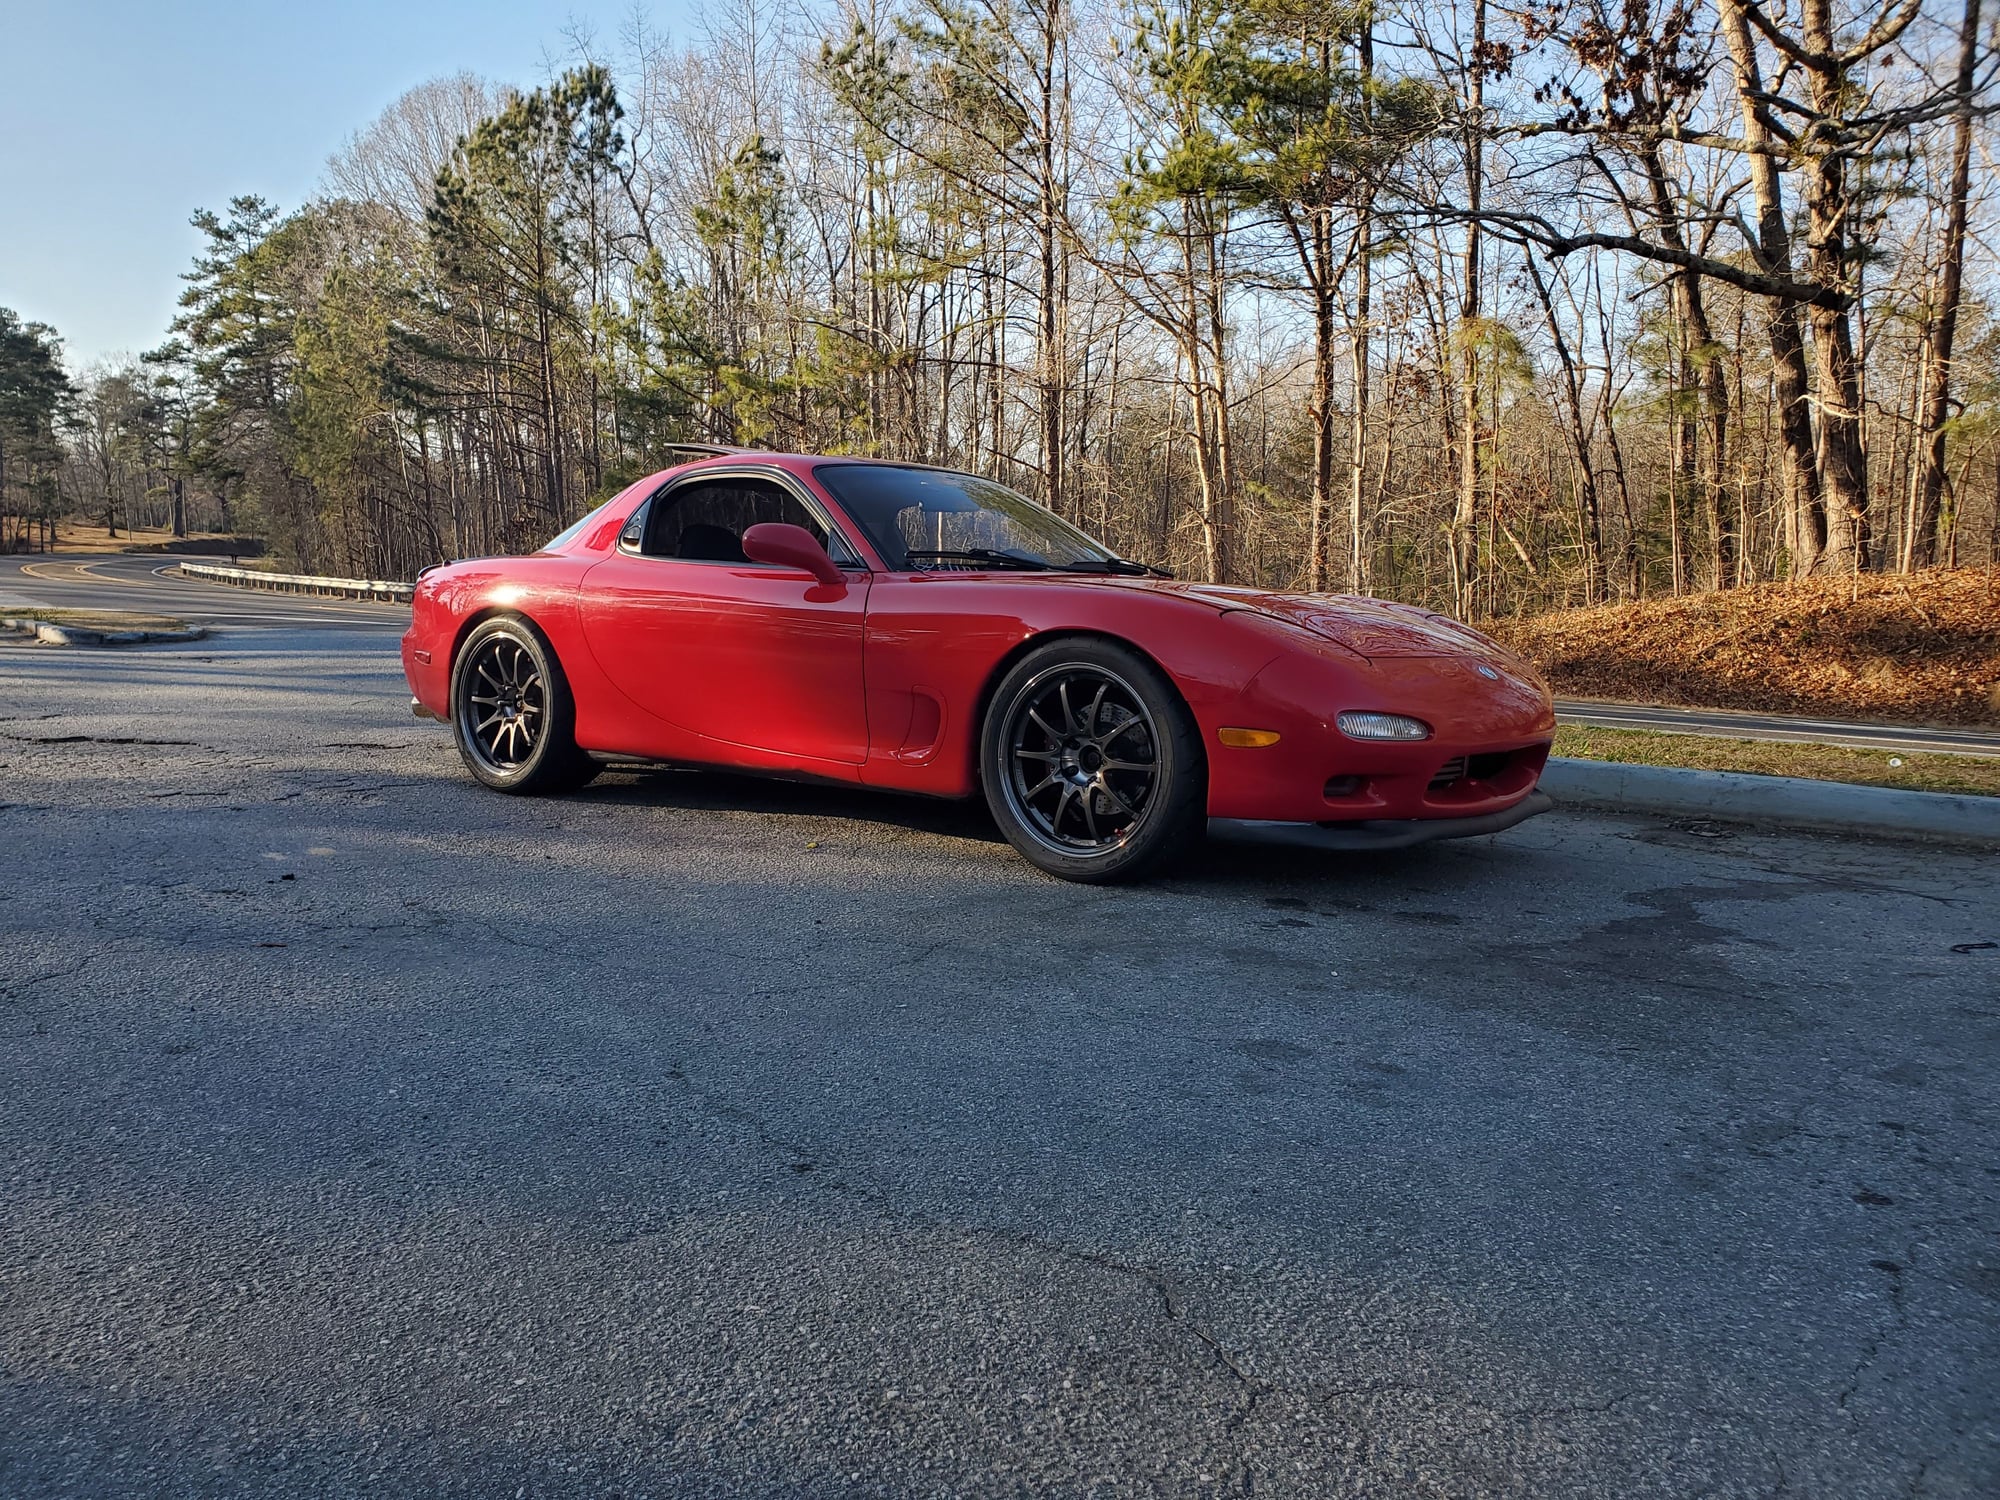 1993 Mazda RX-7 - Semi Peripheral Port FD 778RWHP Street MONSTER for Sale - Used - VIN JM1FD3310P0201279 - 53,000 Miles - Other - 2WD - Manual - Coupe - Red - Canton, GA 30114, United States